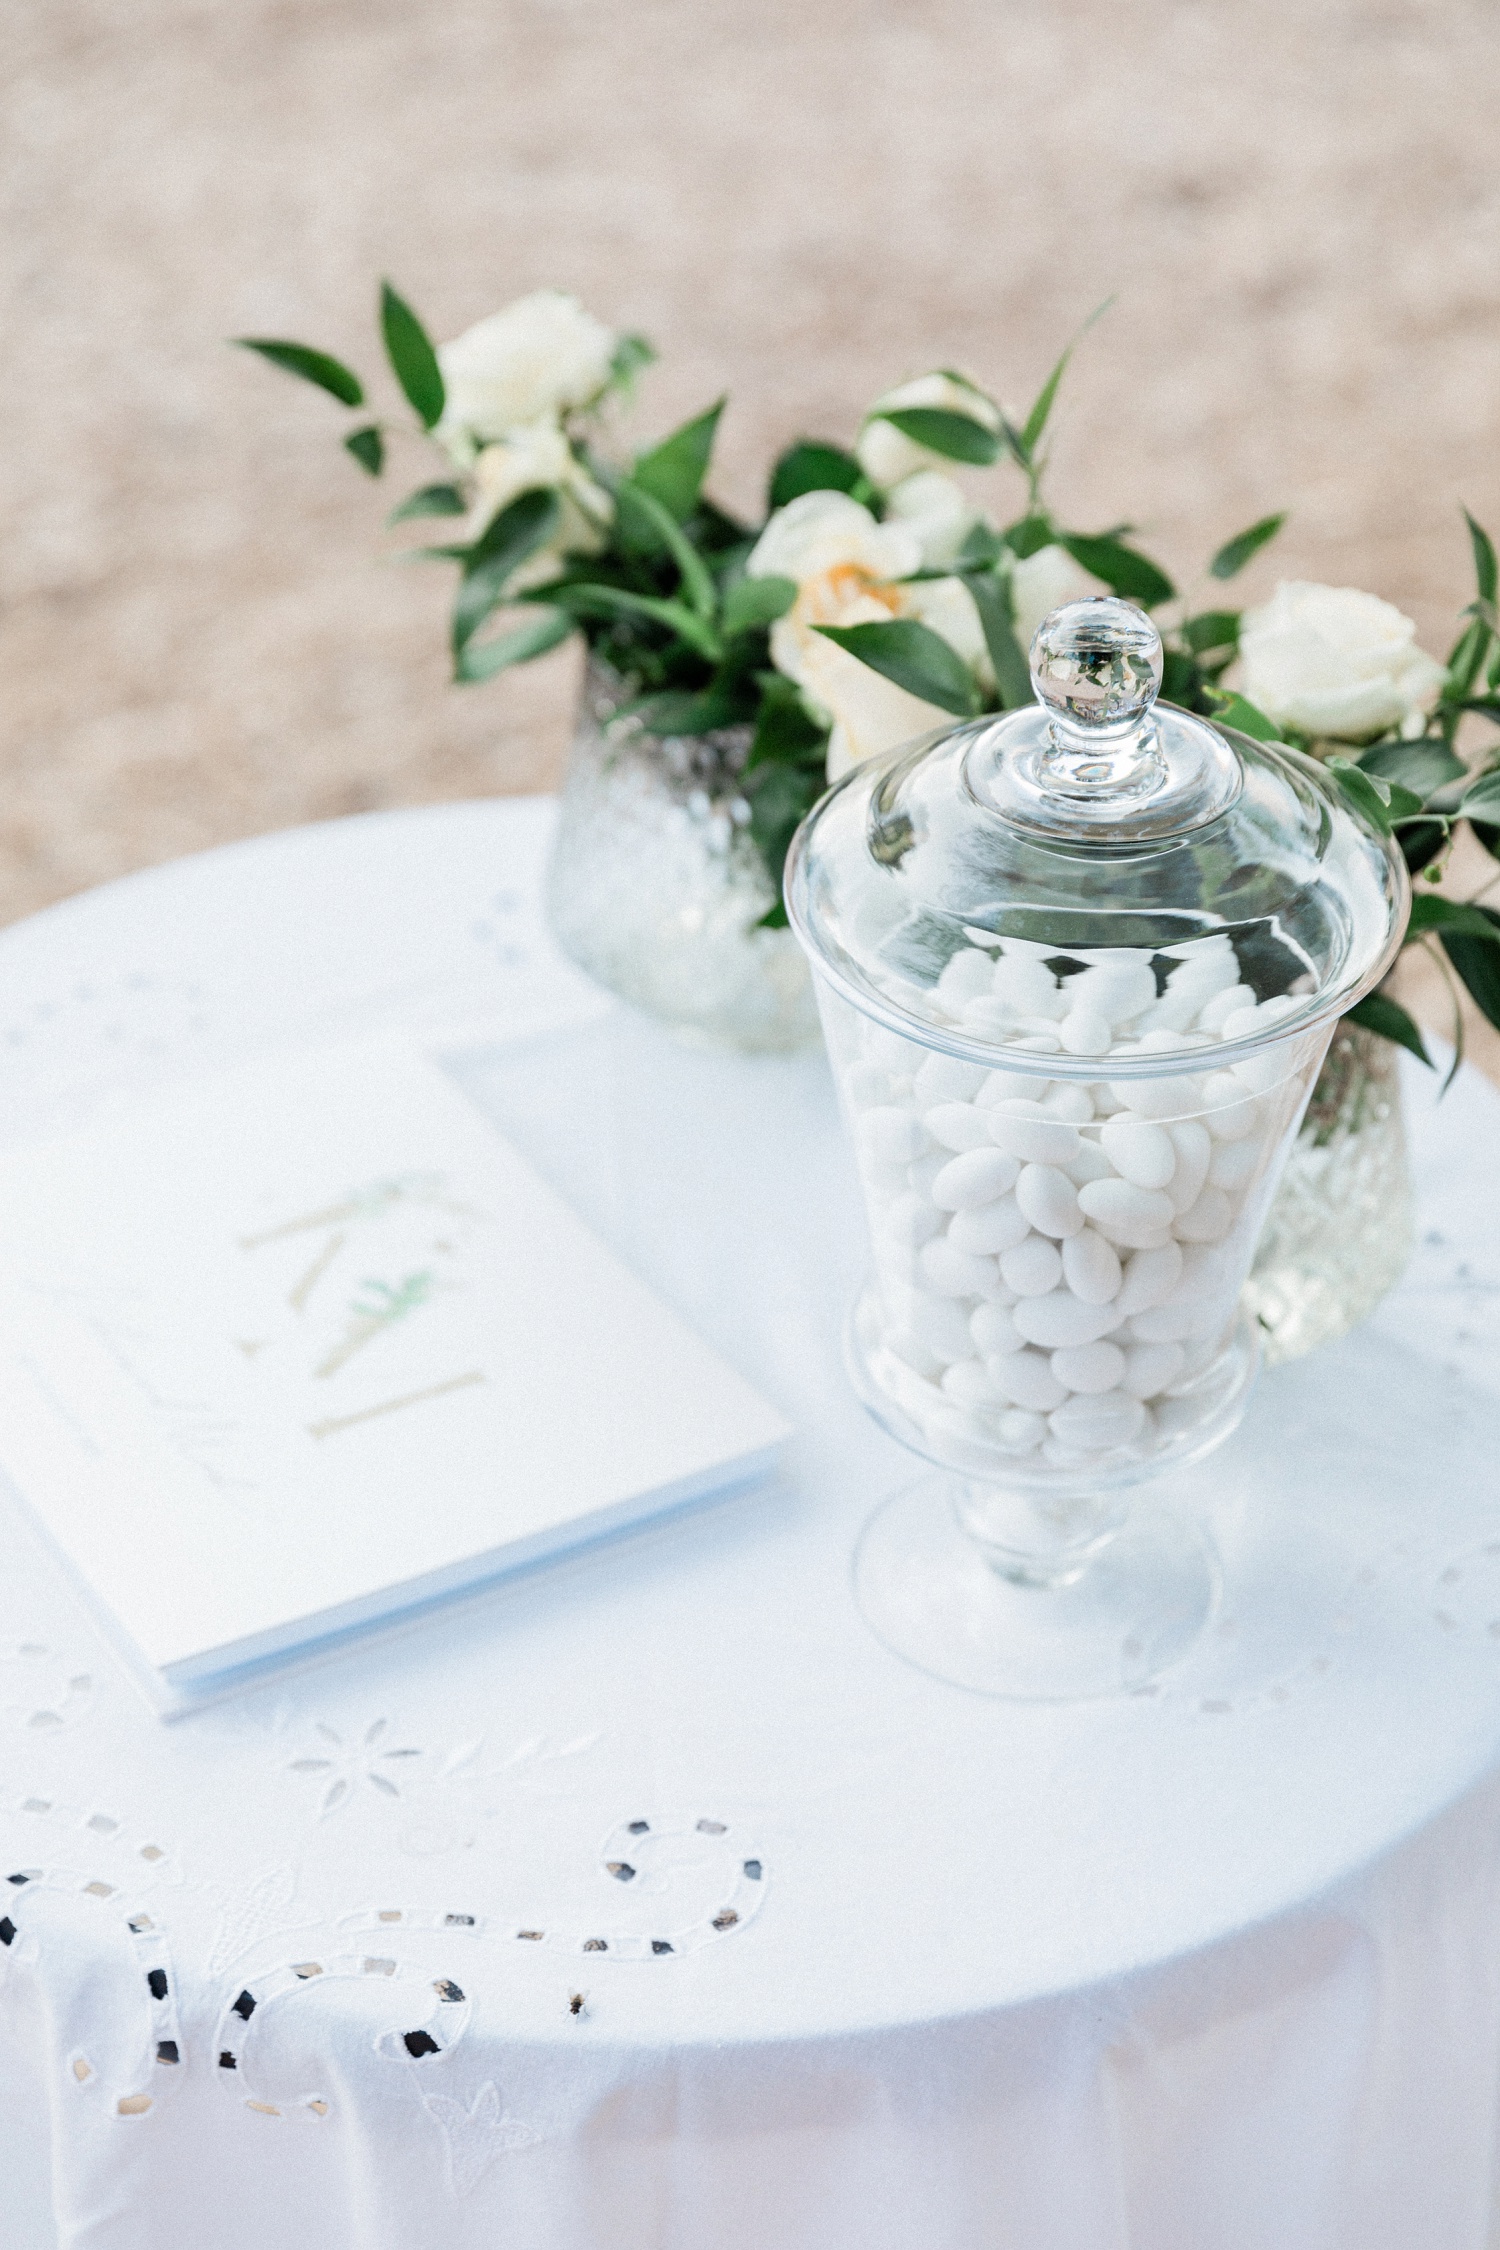 Olive grove wedding welcome table with white candy and rose and greenery arrangements